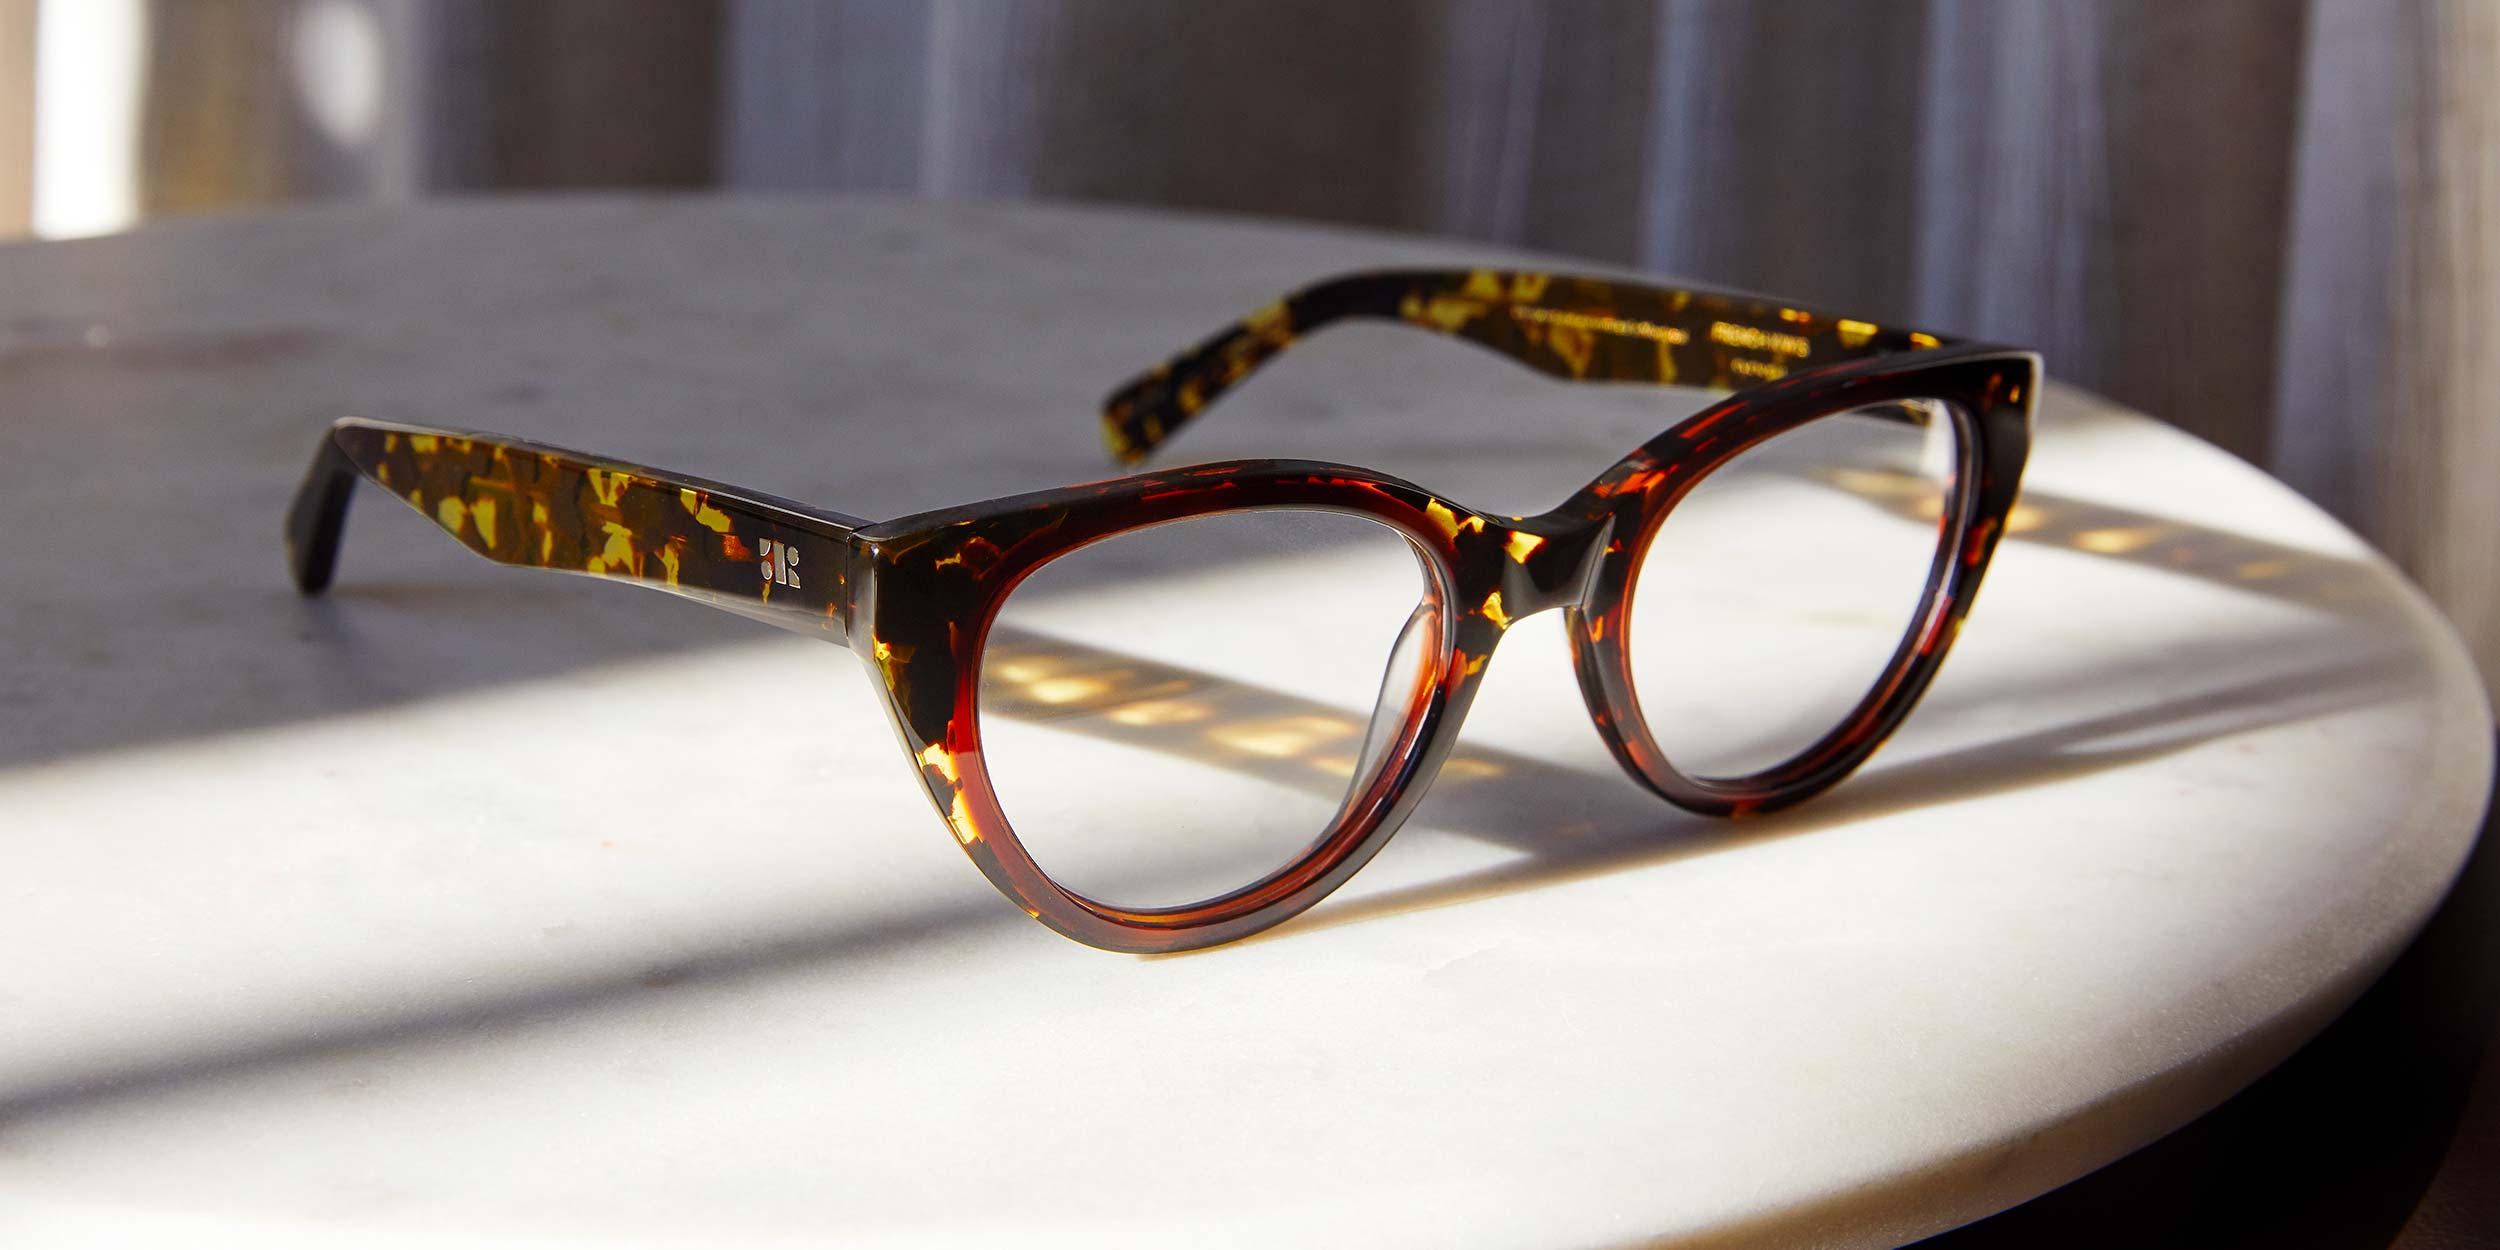 Photo Details of Colette Tortoise & Brown Reading Glasses in a room